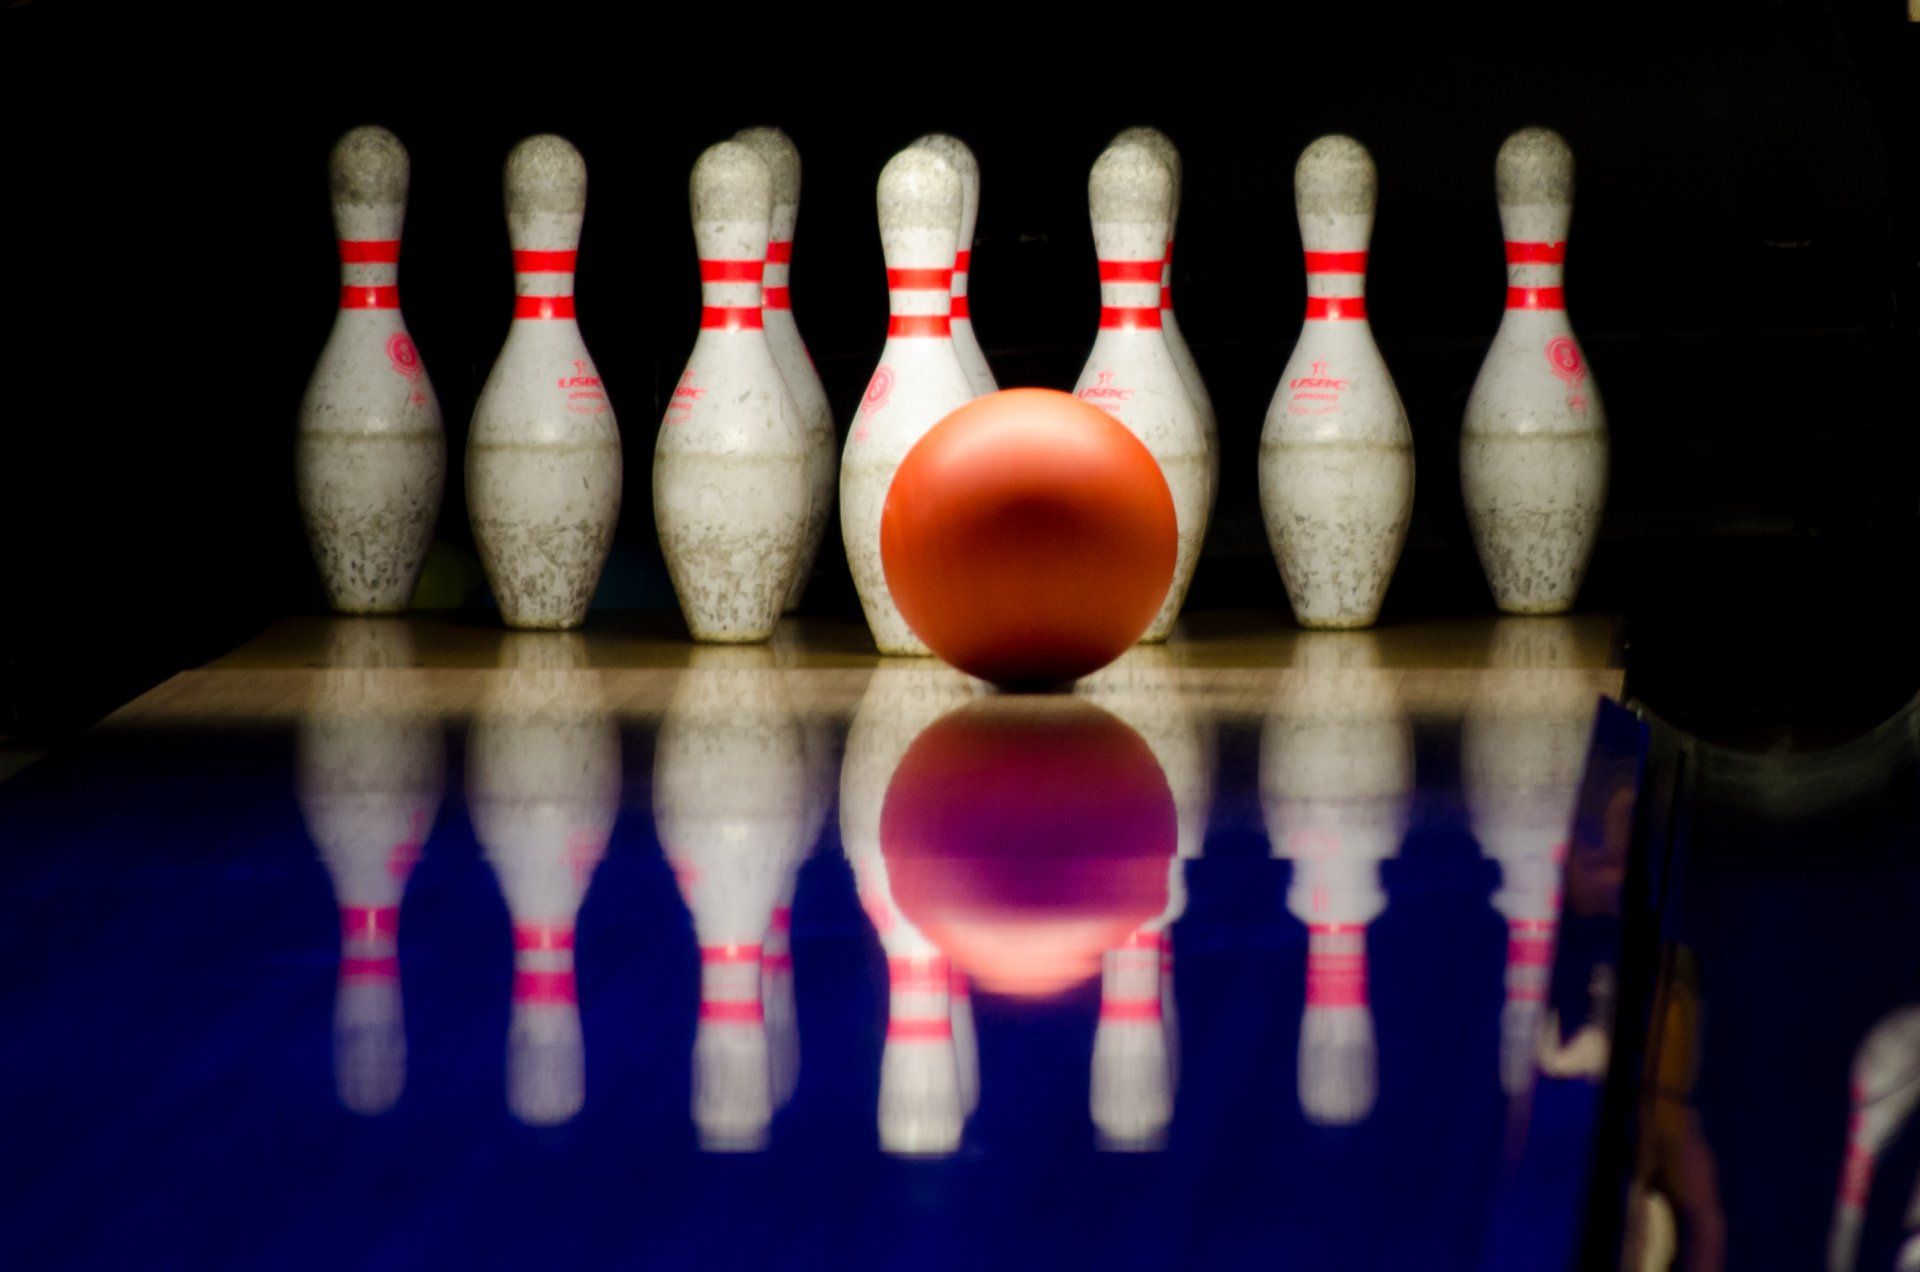 A bowling ball is sitting in front of a row of bowling pins.